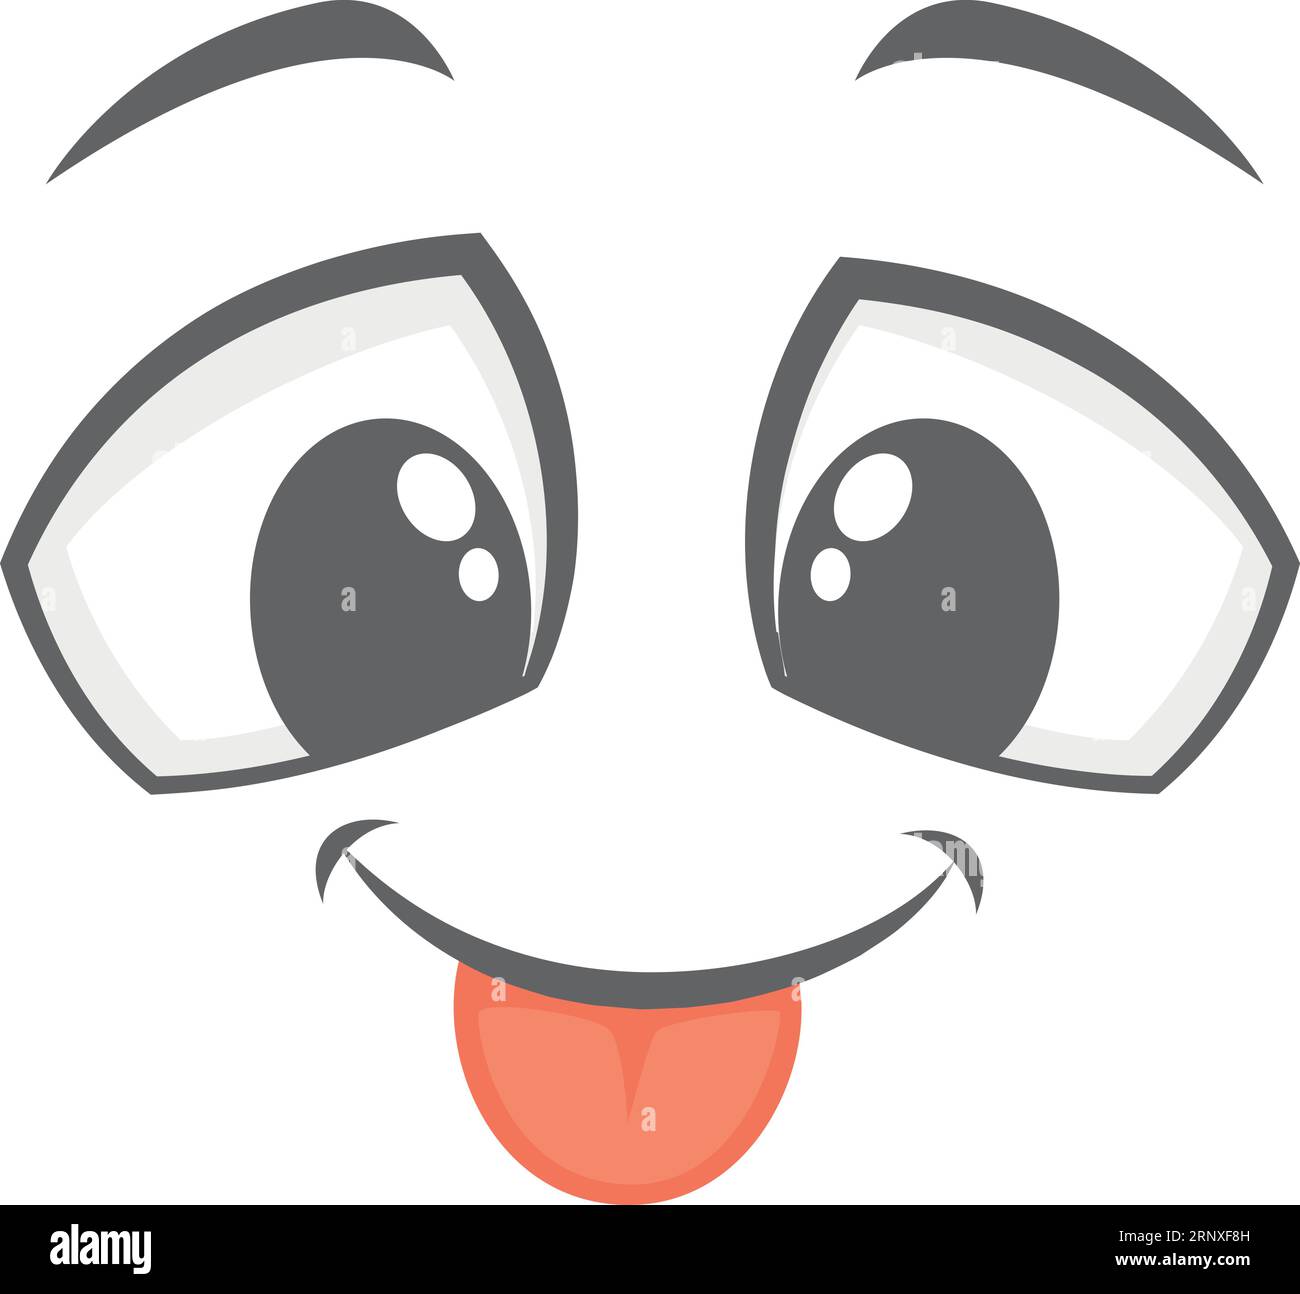 Face with tongue out. Playful grin emoji Stock Vector